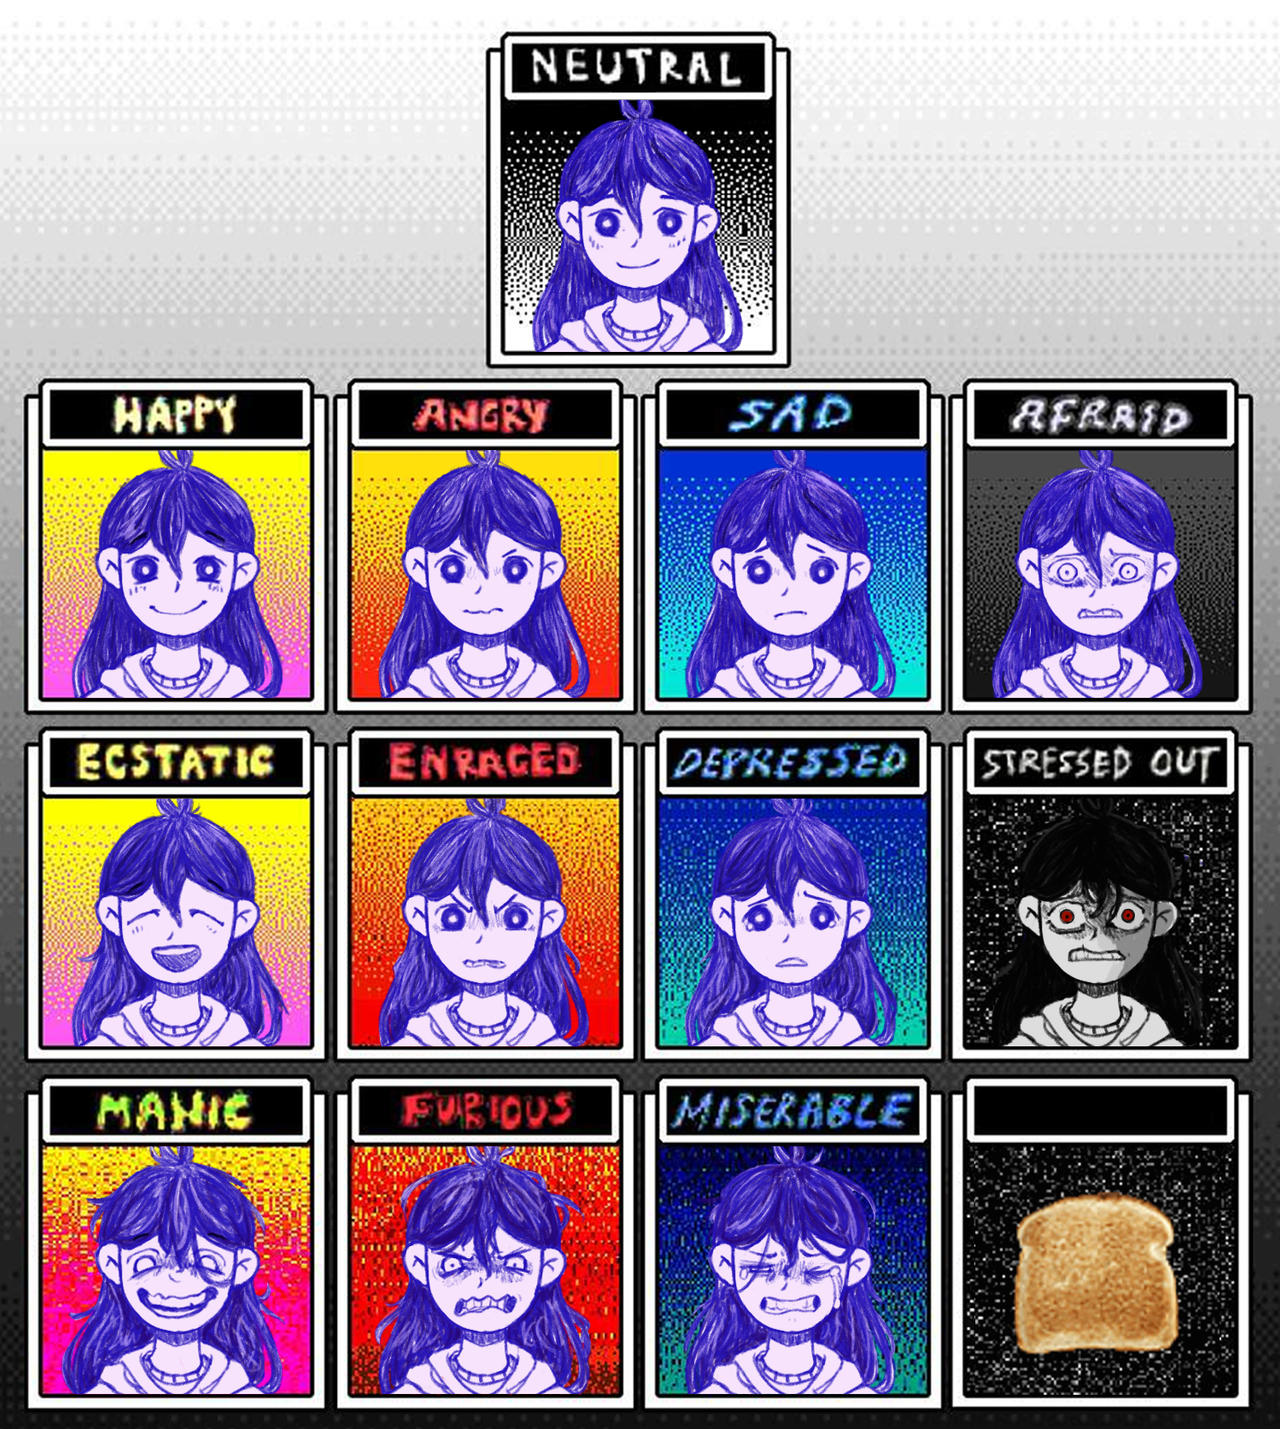 Val's Omori emotion chart by CatnamedCookie on DeviantArt